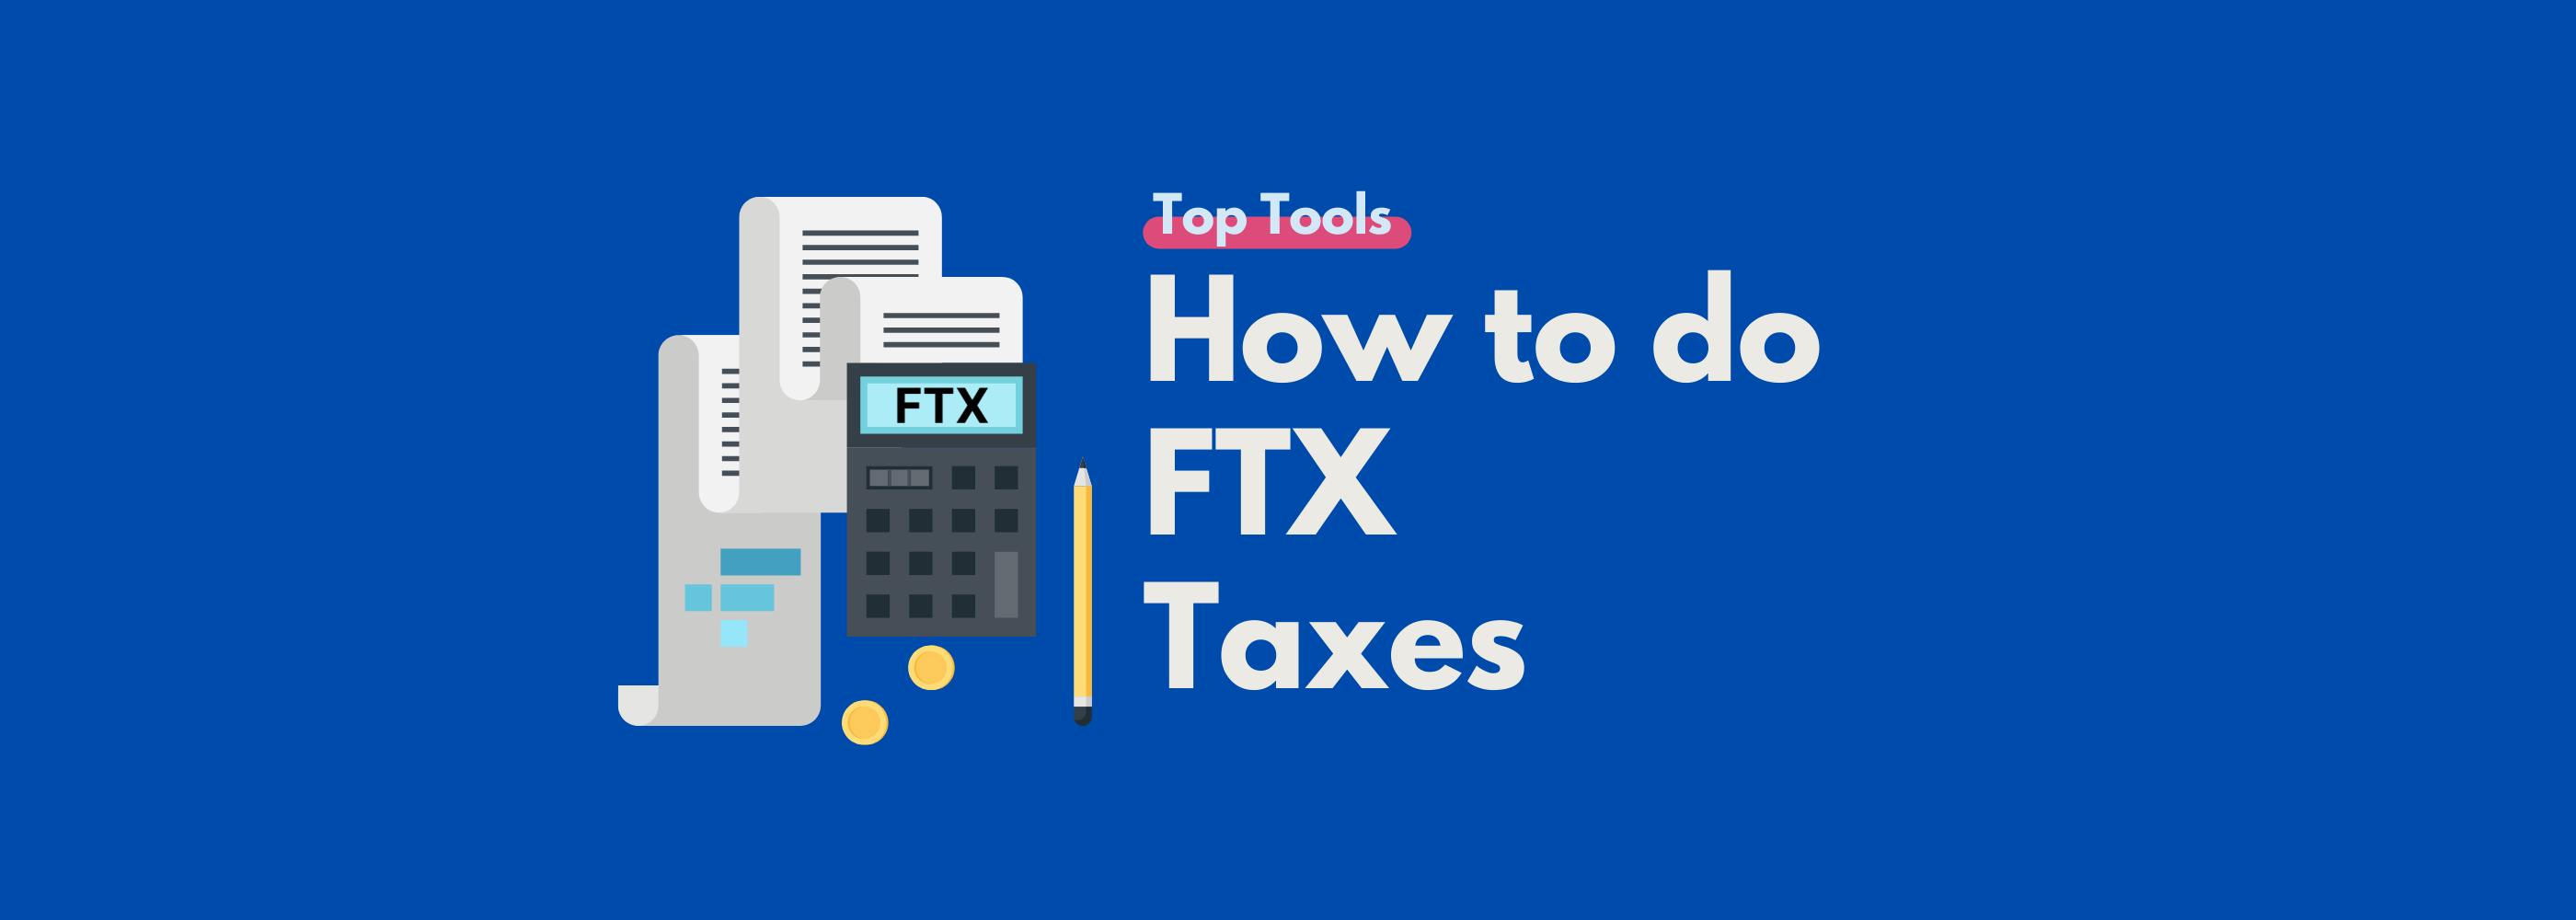 FTX taxes guide